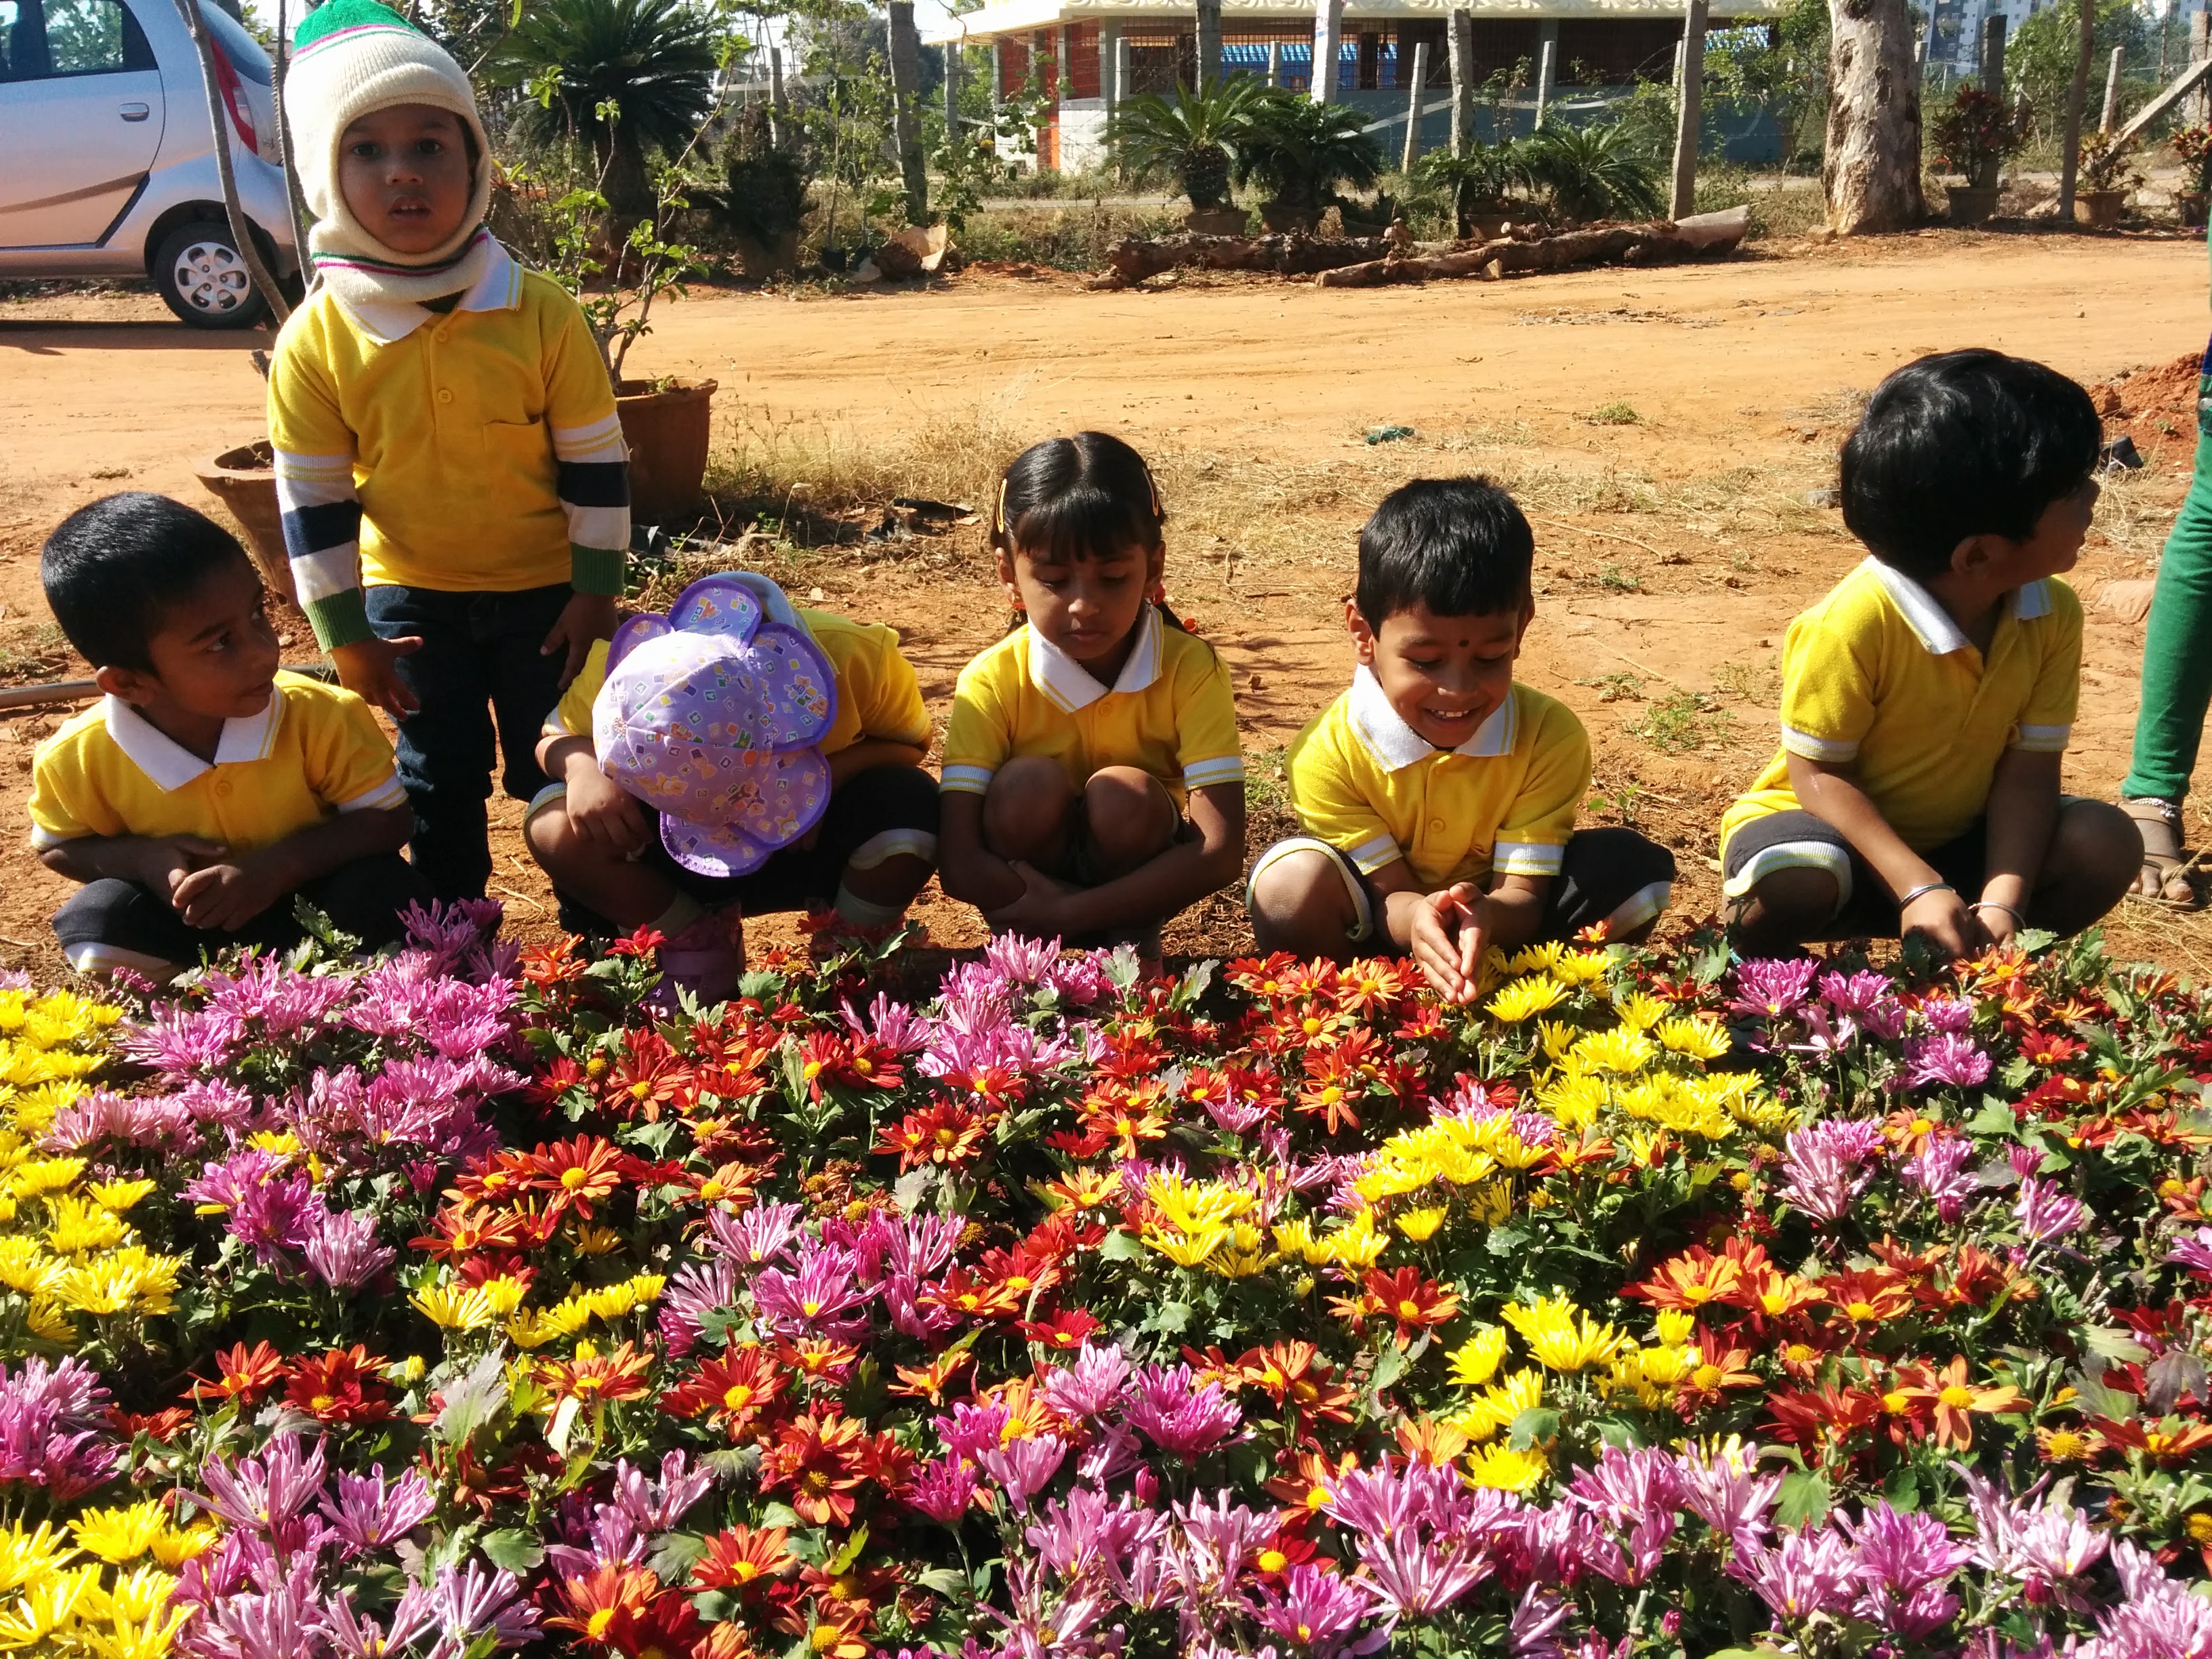 Kids observing different types of flowers